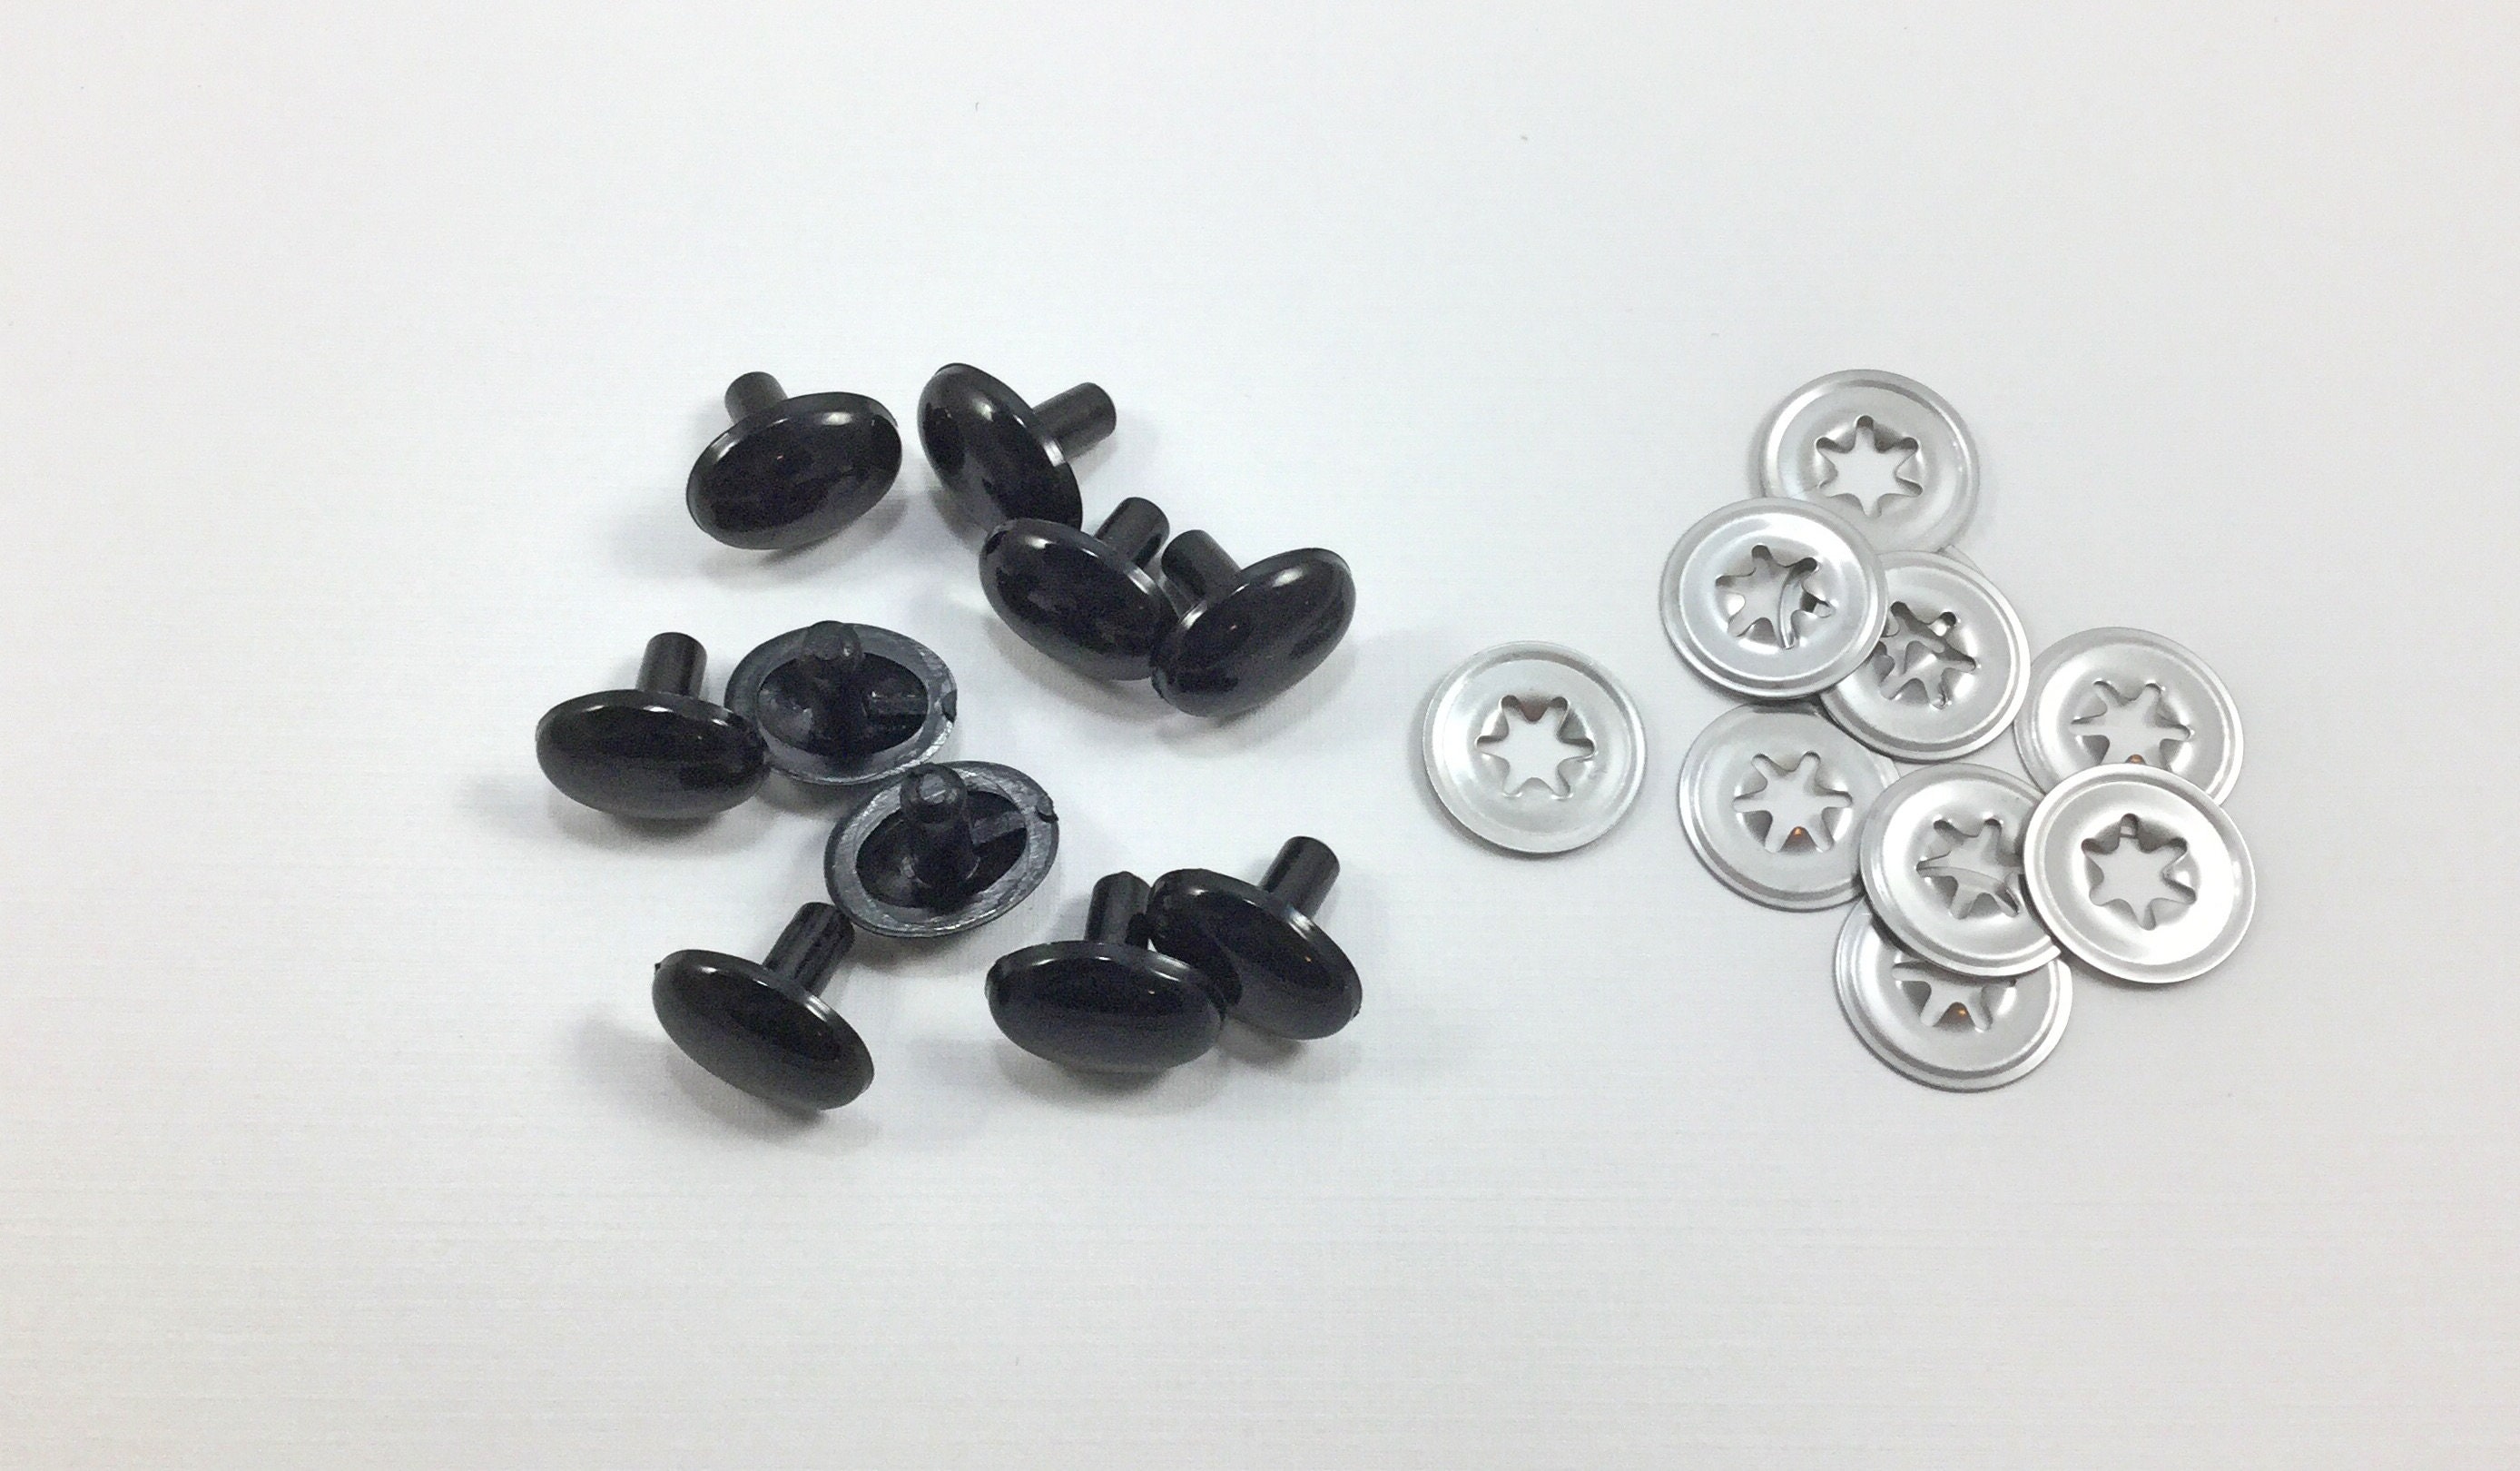 13mm Solid Black Oval Safety Eyes 5 Pairs Toy Eyes Plastic Animal